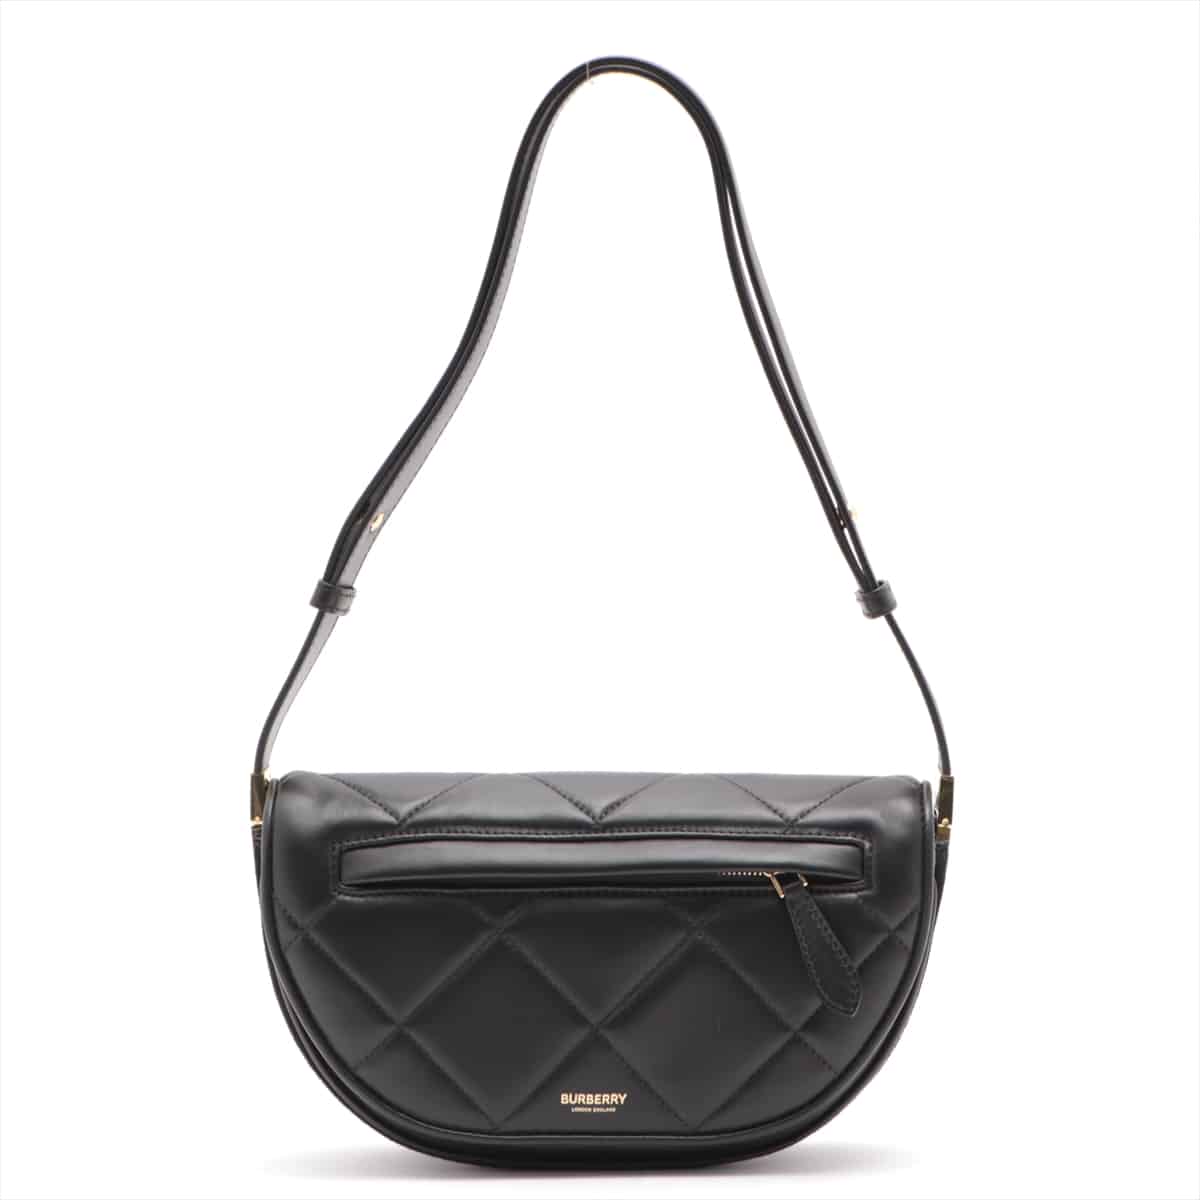 Burberry Olympia Olympia Leather Shoulder bag Black